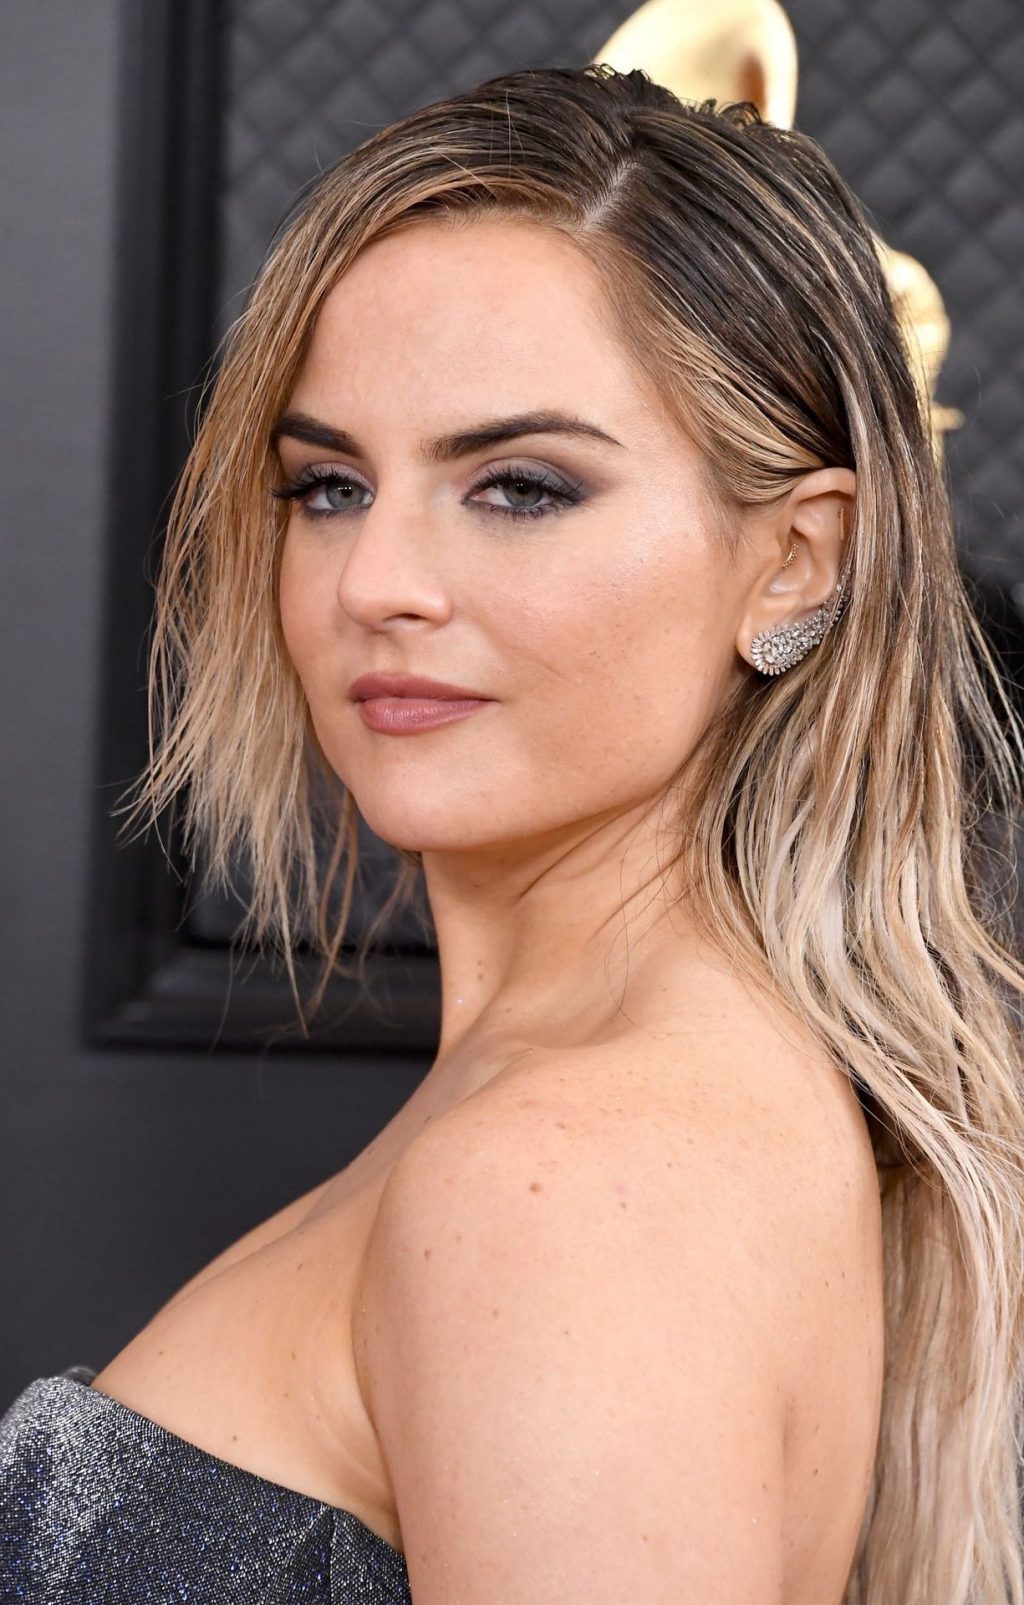 JoJo Shows Her Legs and Cleavage at the 62nd Annual Grammy Awards (42 Photos)